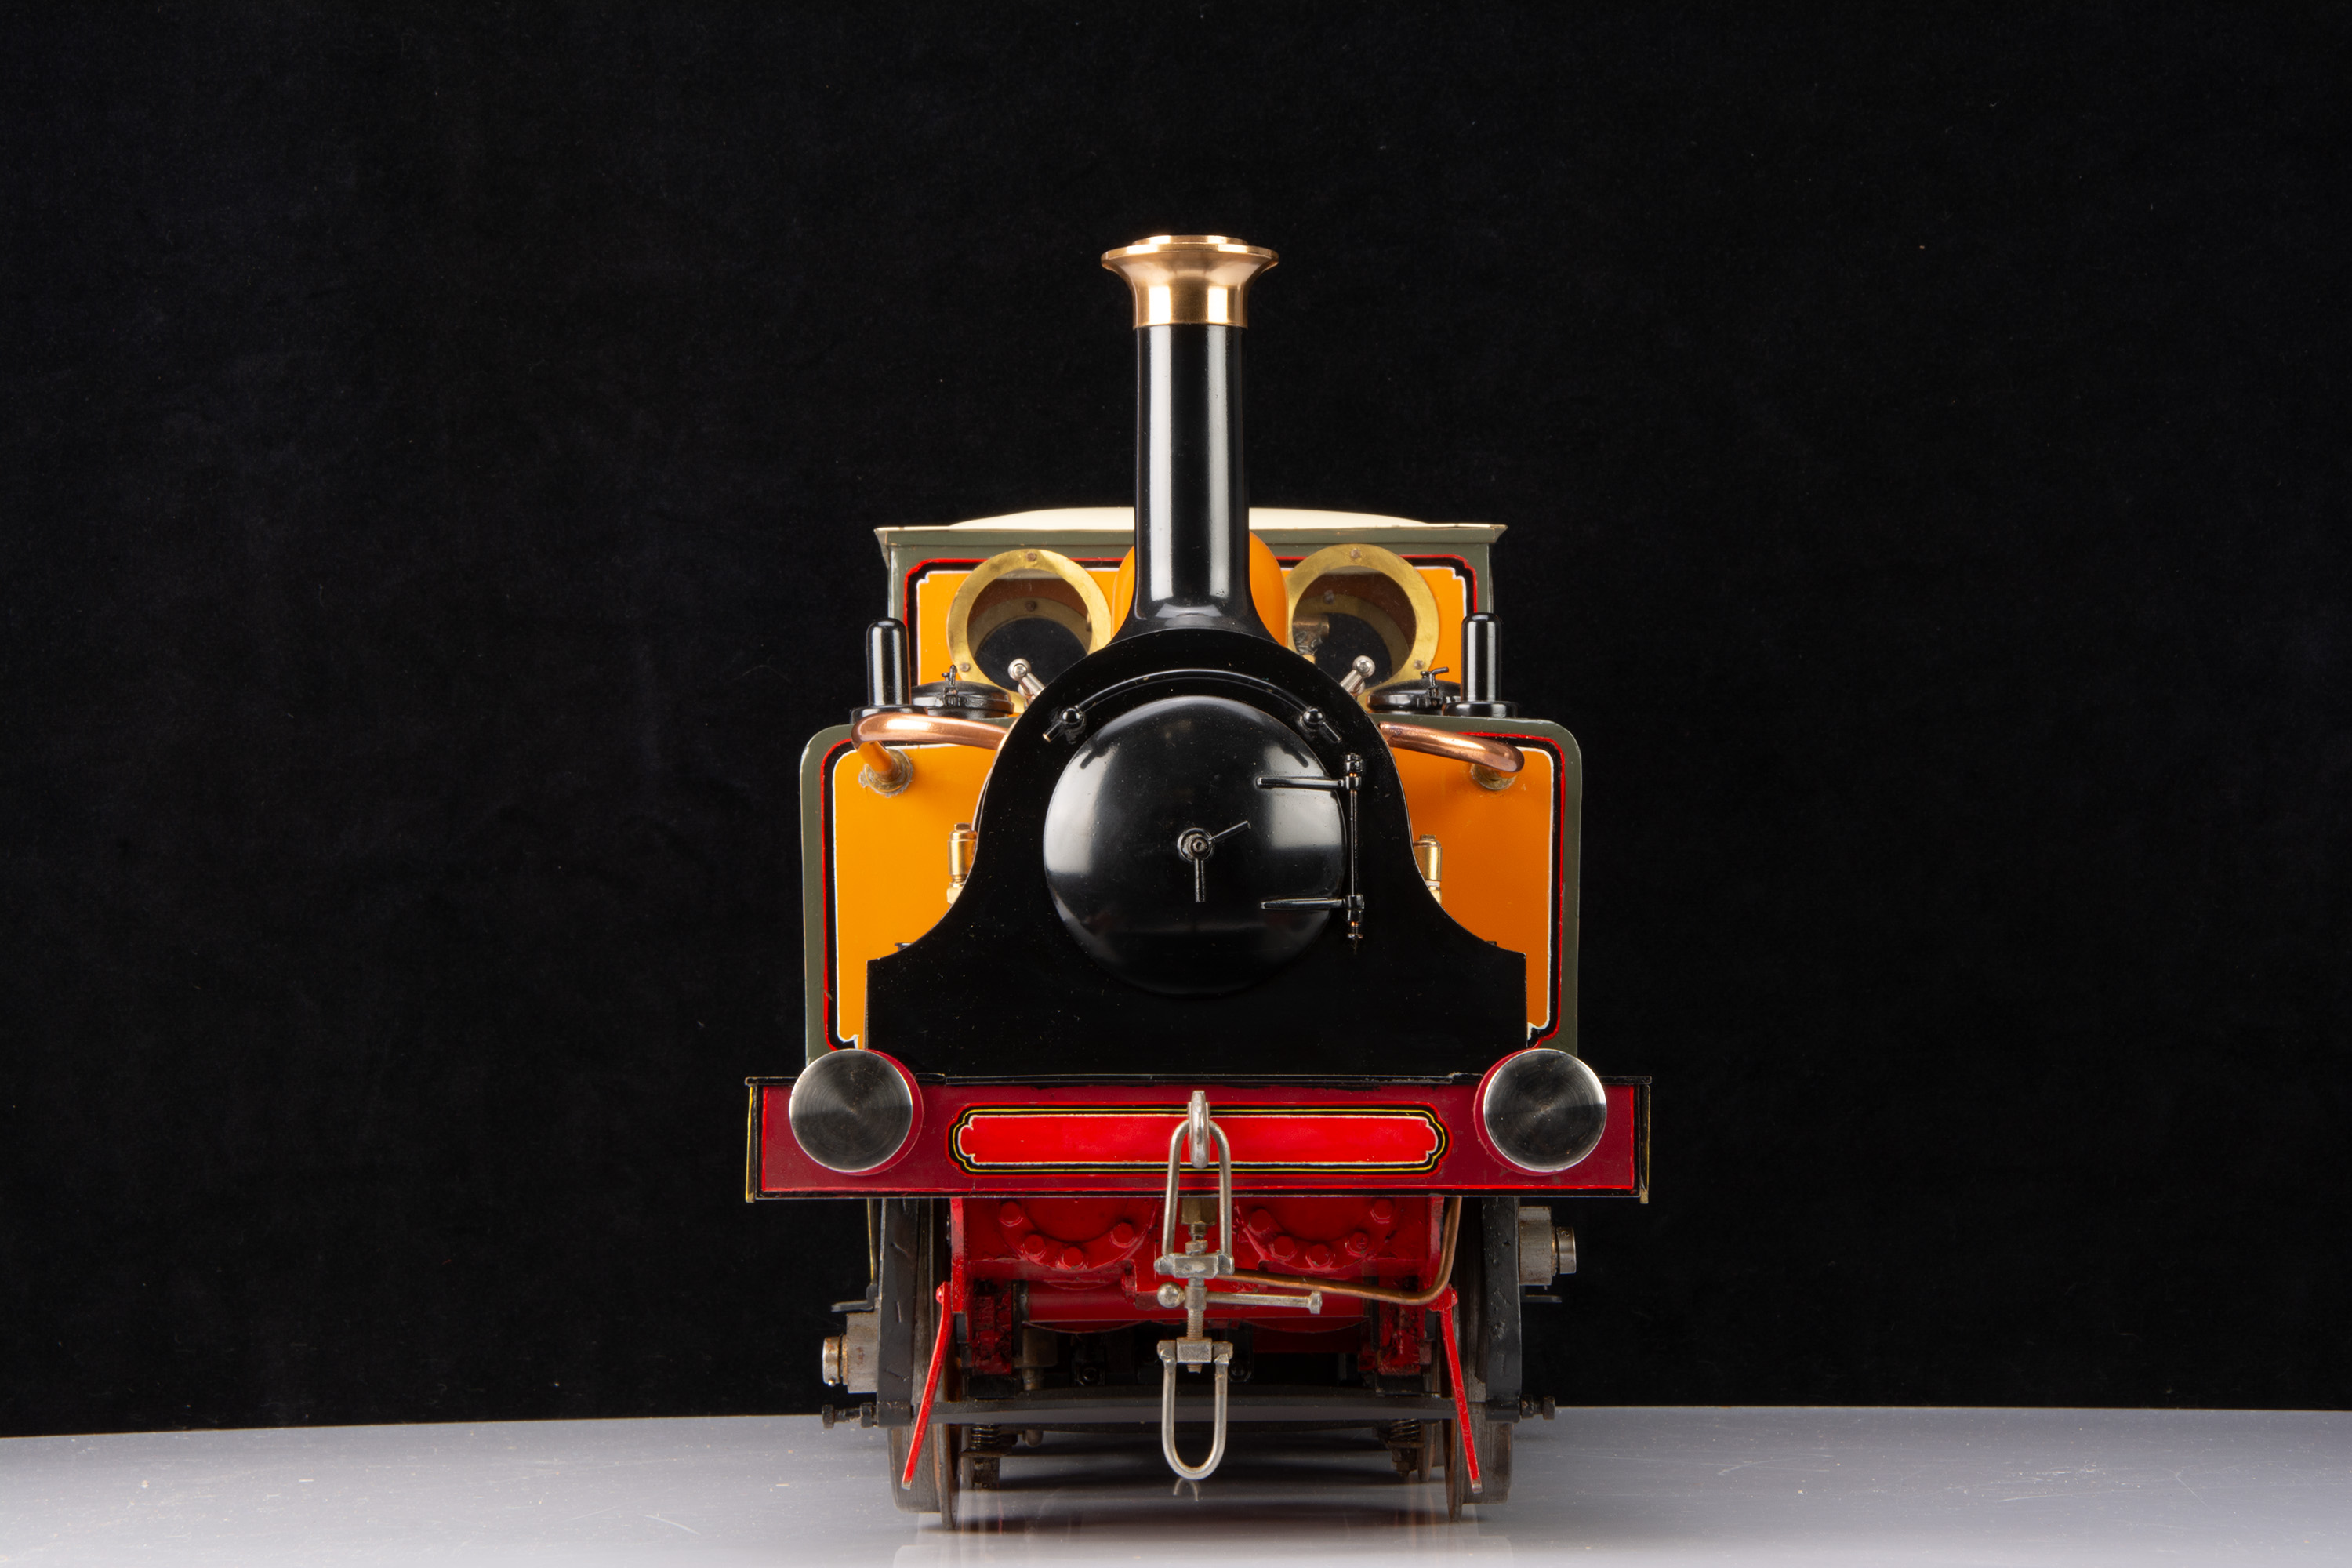 TWO DAY: Glorious Trains Auction (0 Gauge and Larger Gauges)